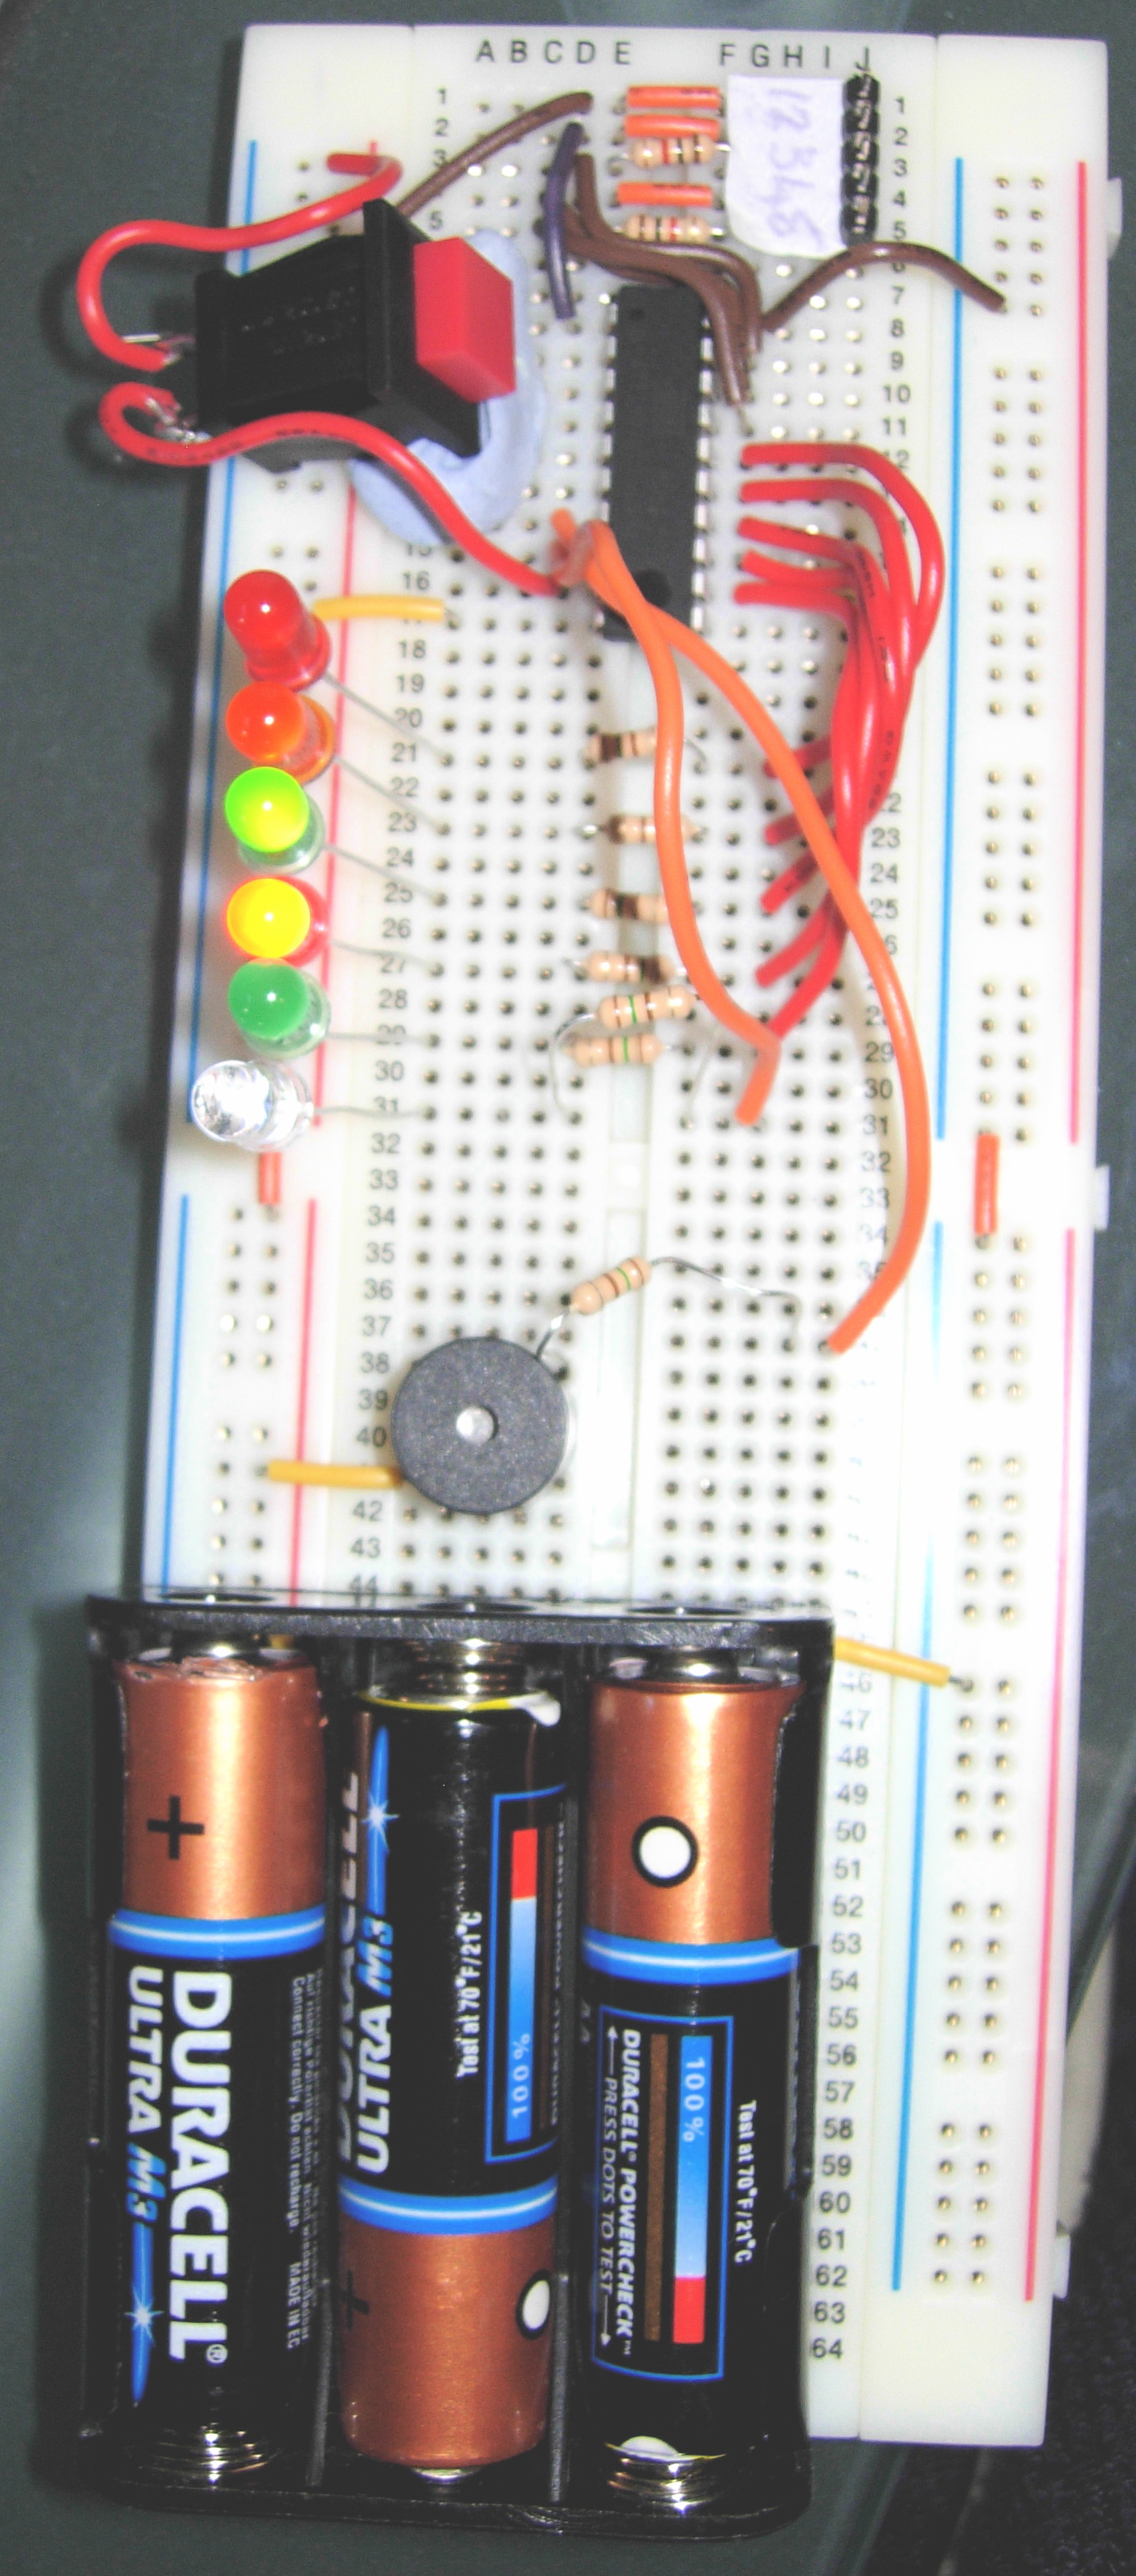 Micro controller programming: Making a set of traffic lights